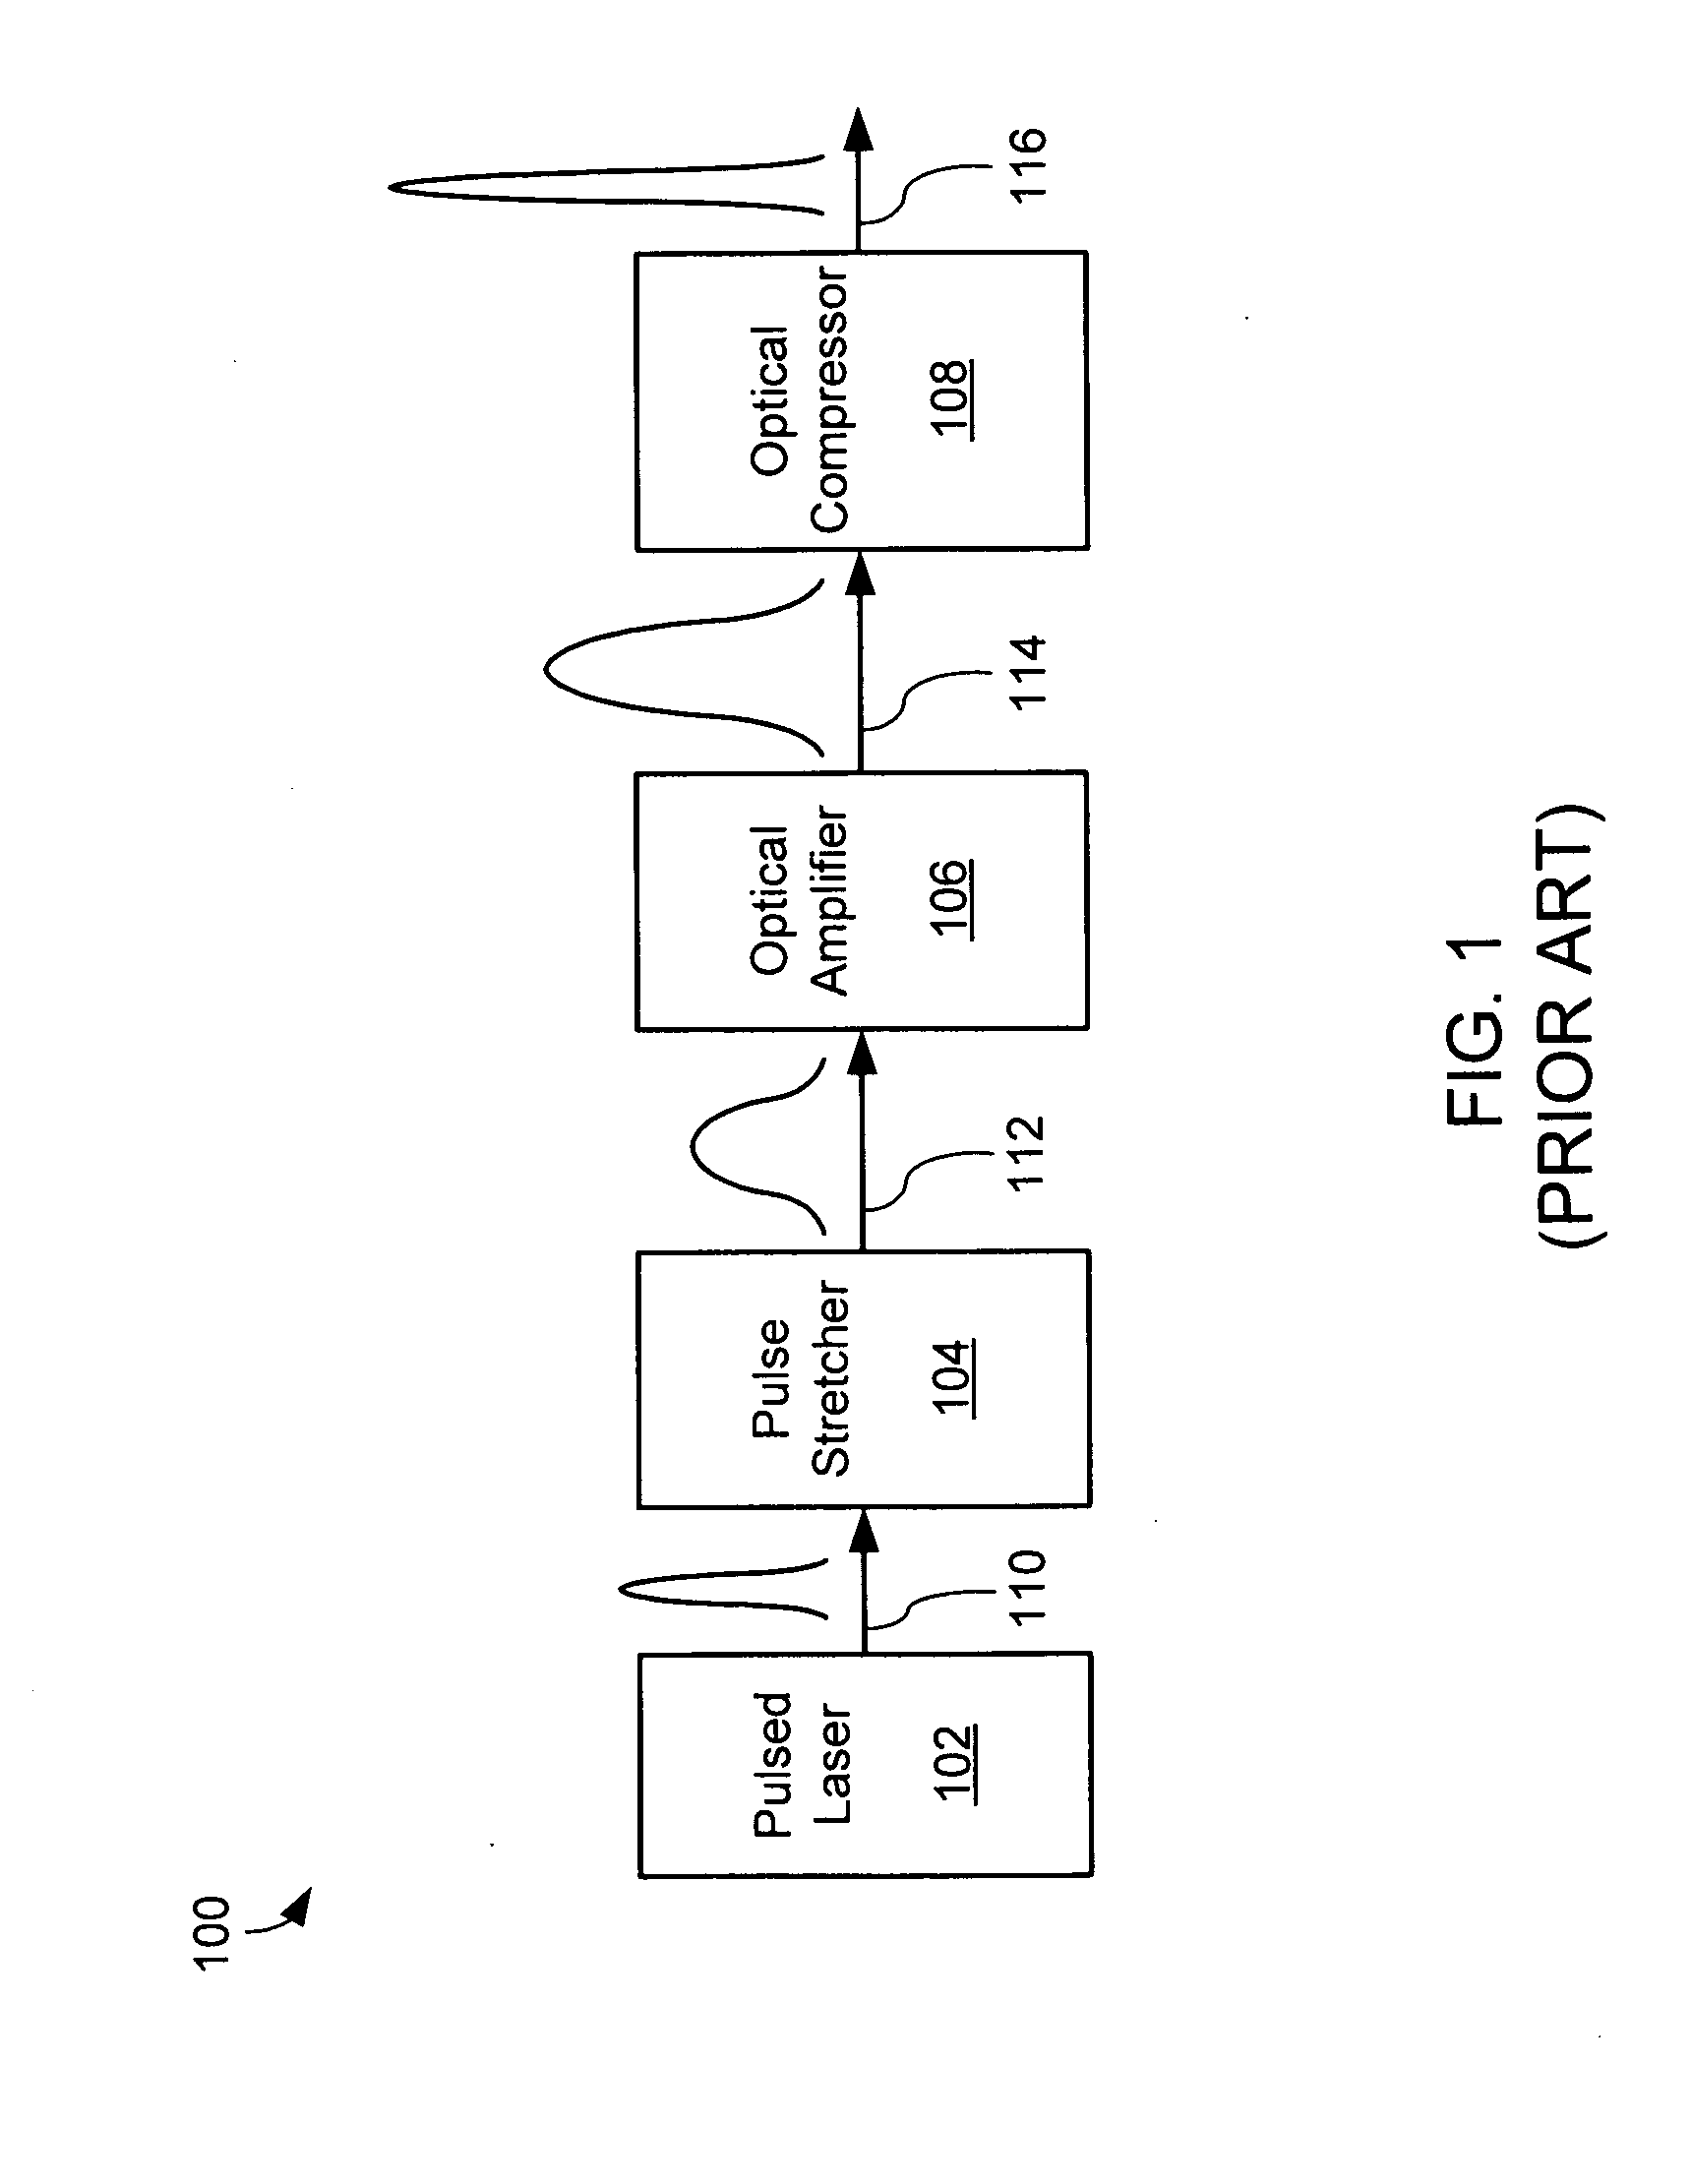 Systems and methods for controlling a pulsed laser by combining laser signals